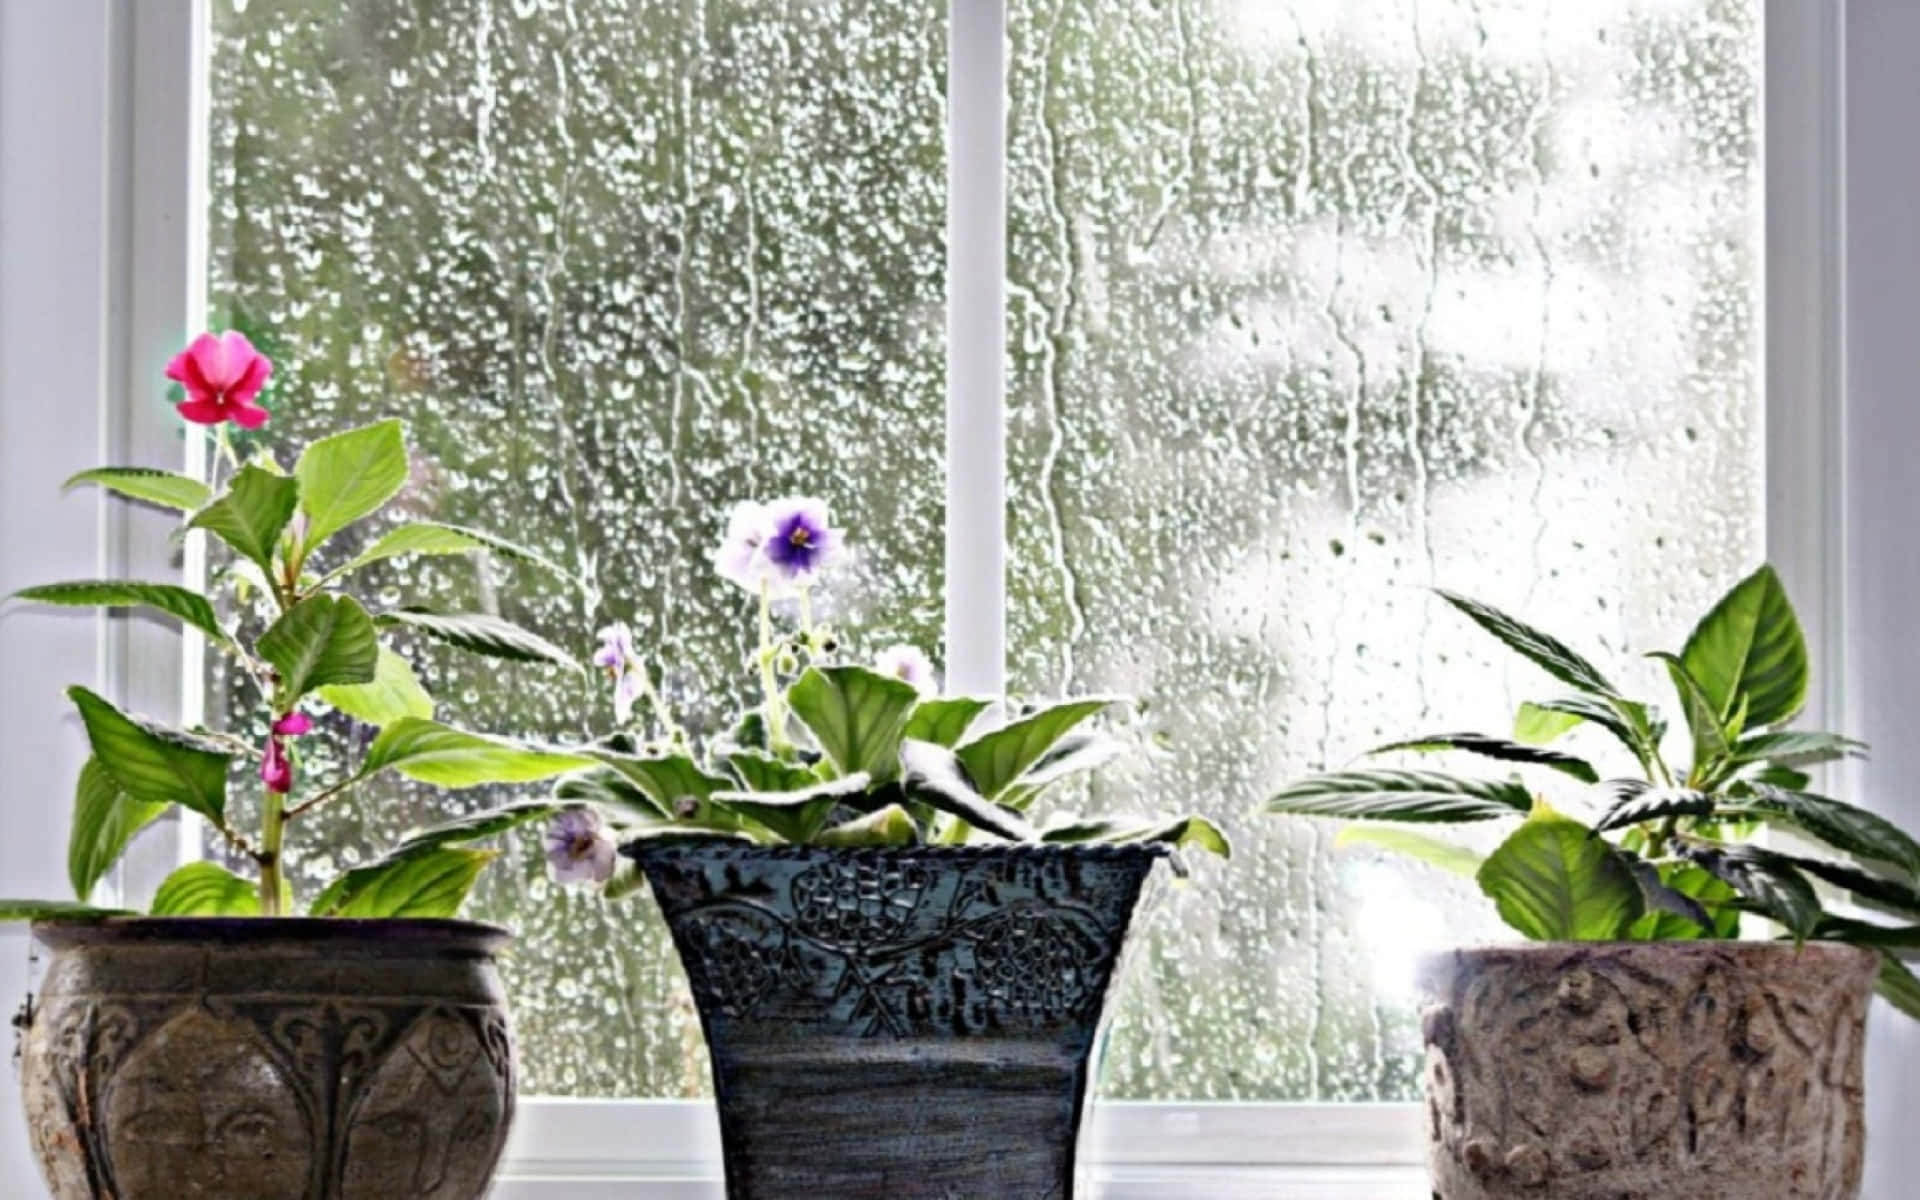 Three Potted Plants Sit In Front Of A Window